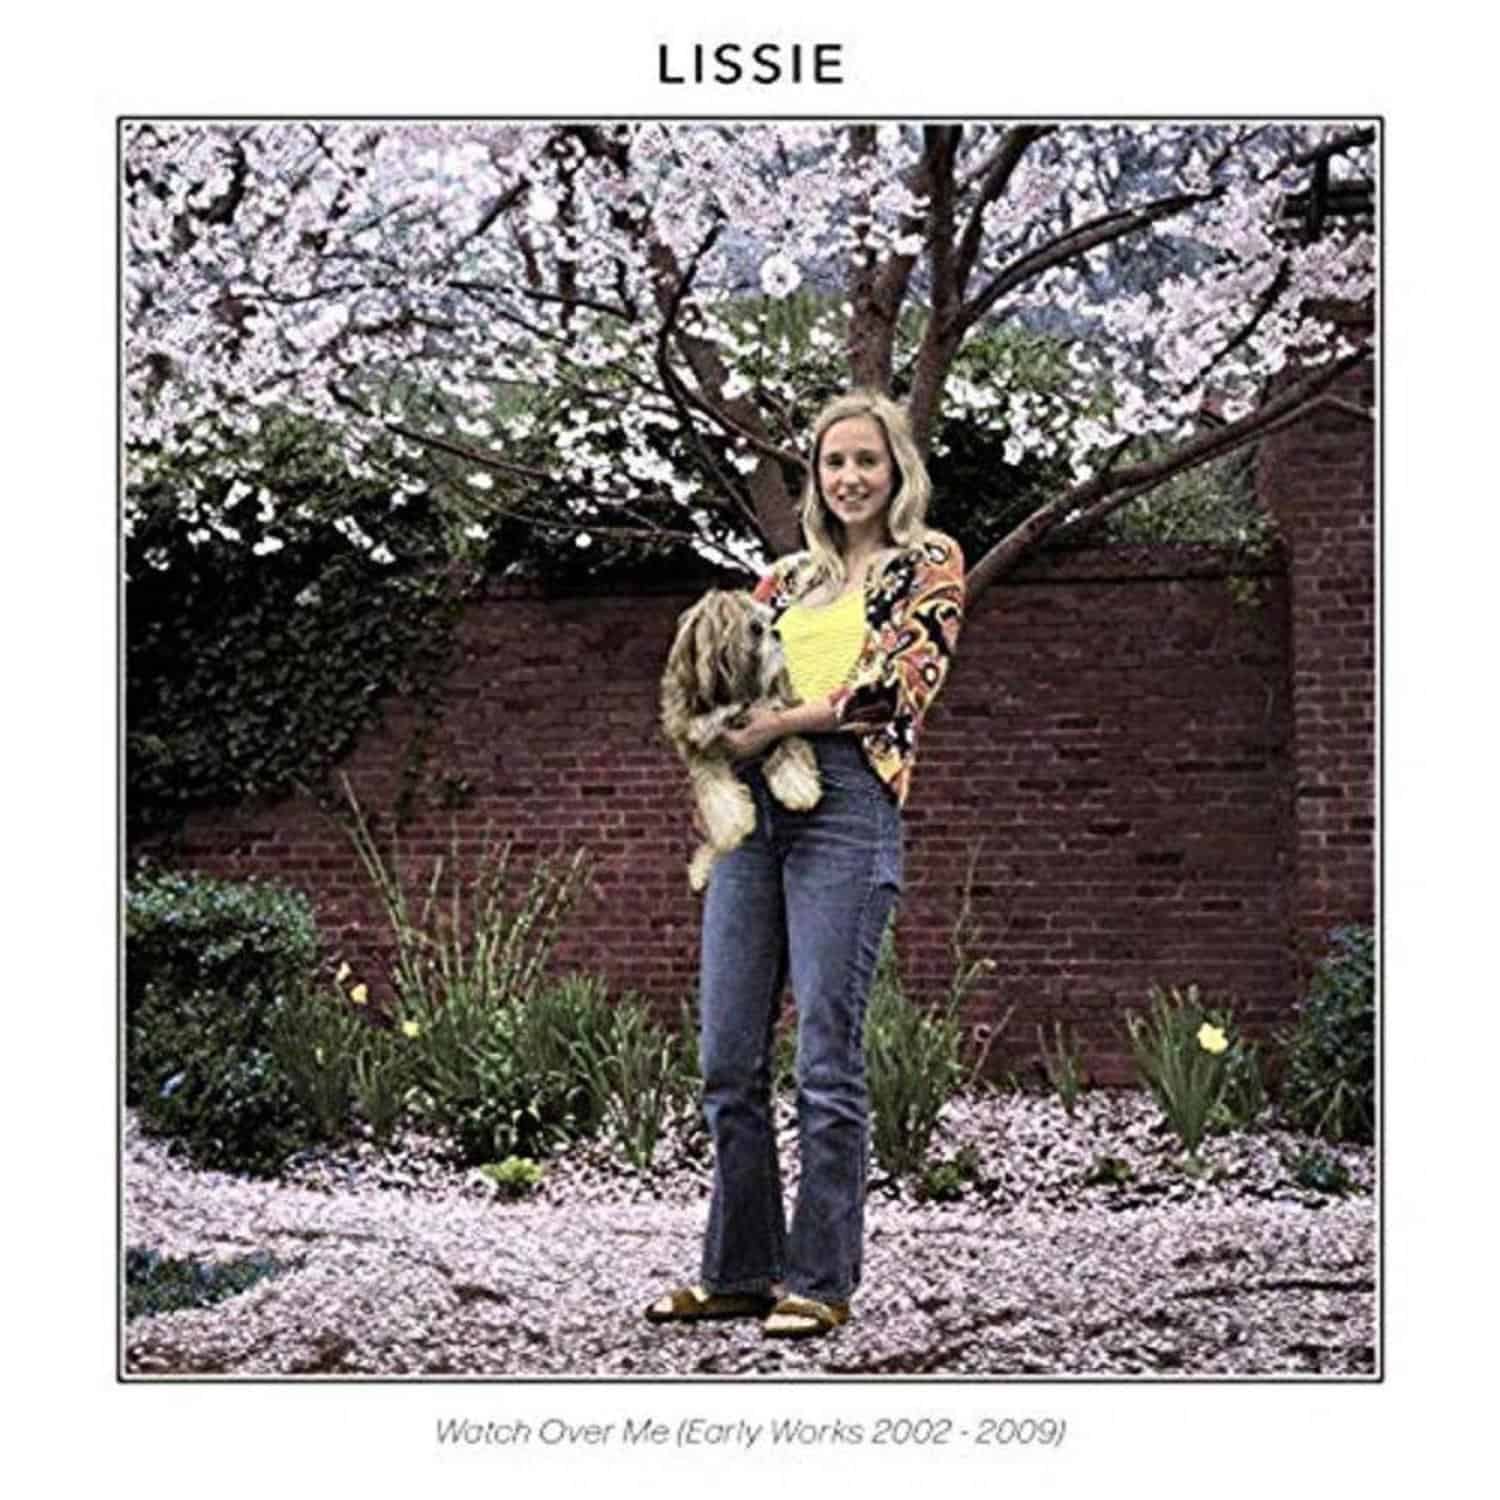 Lissie - WATCH OVER ME - EARLY WORKS 2002-2009 